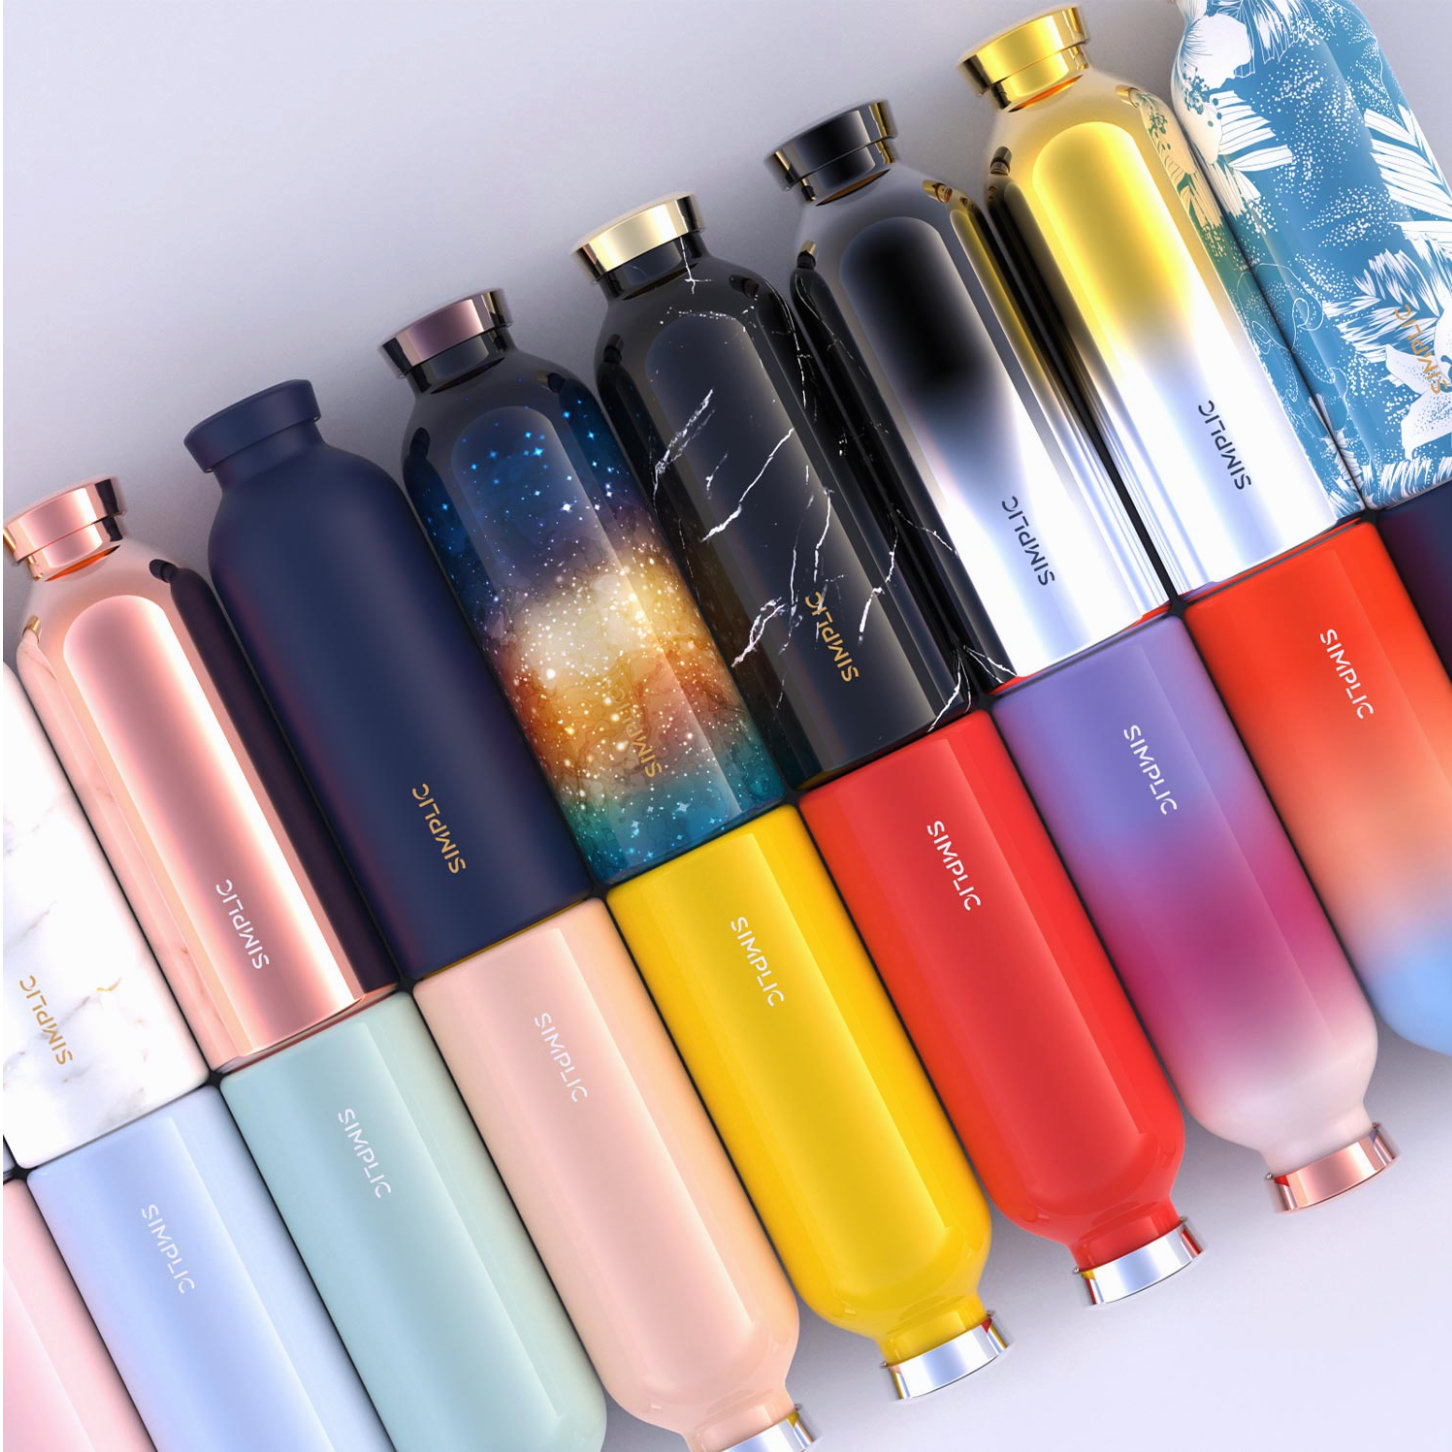 Simplic Double-Wall Insulated Stainless Steel Bottle  - 500ml